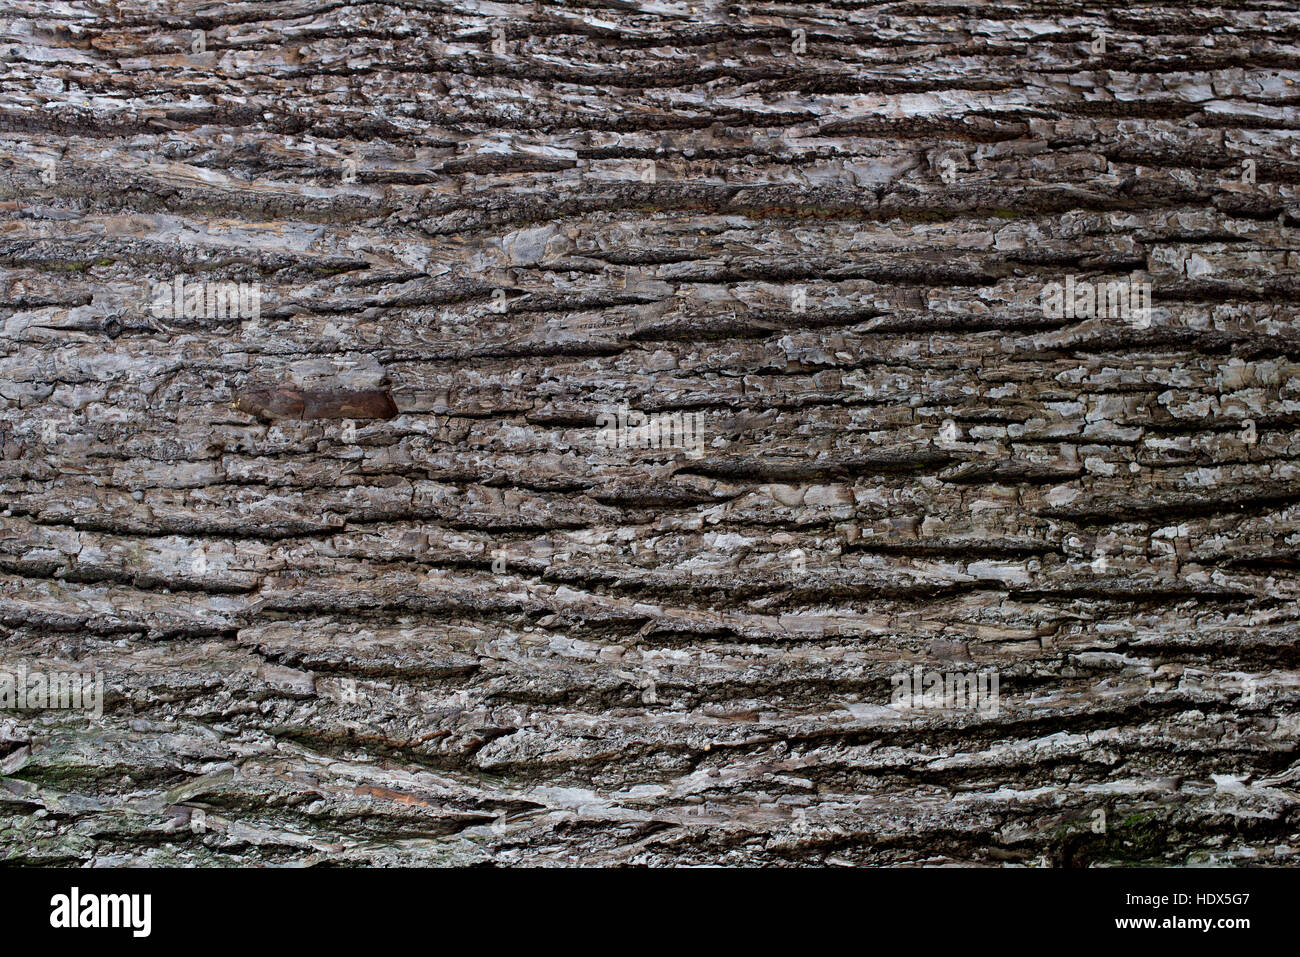 Tree Surface texture of a tree trunk Stock Photo